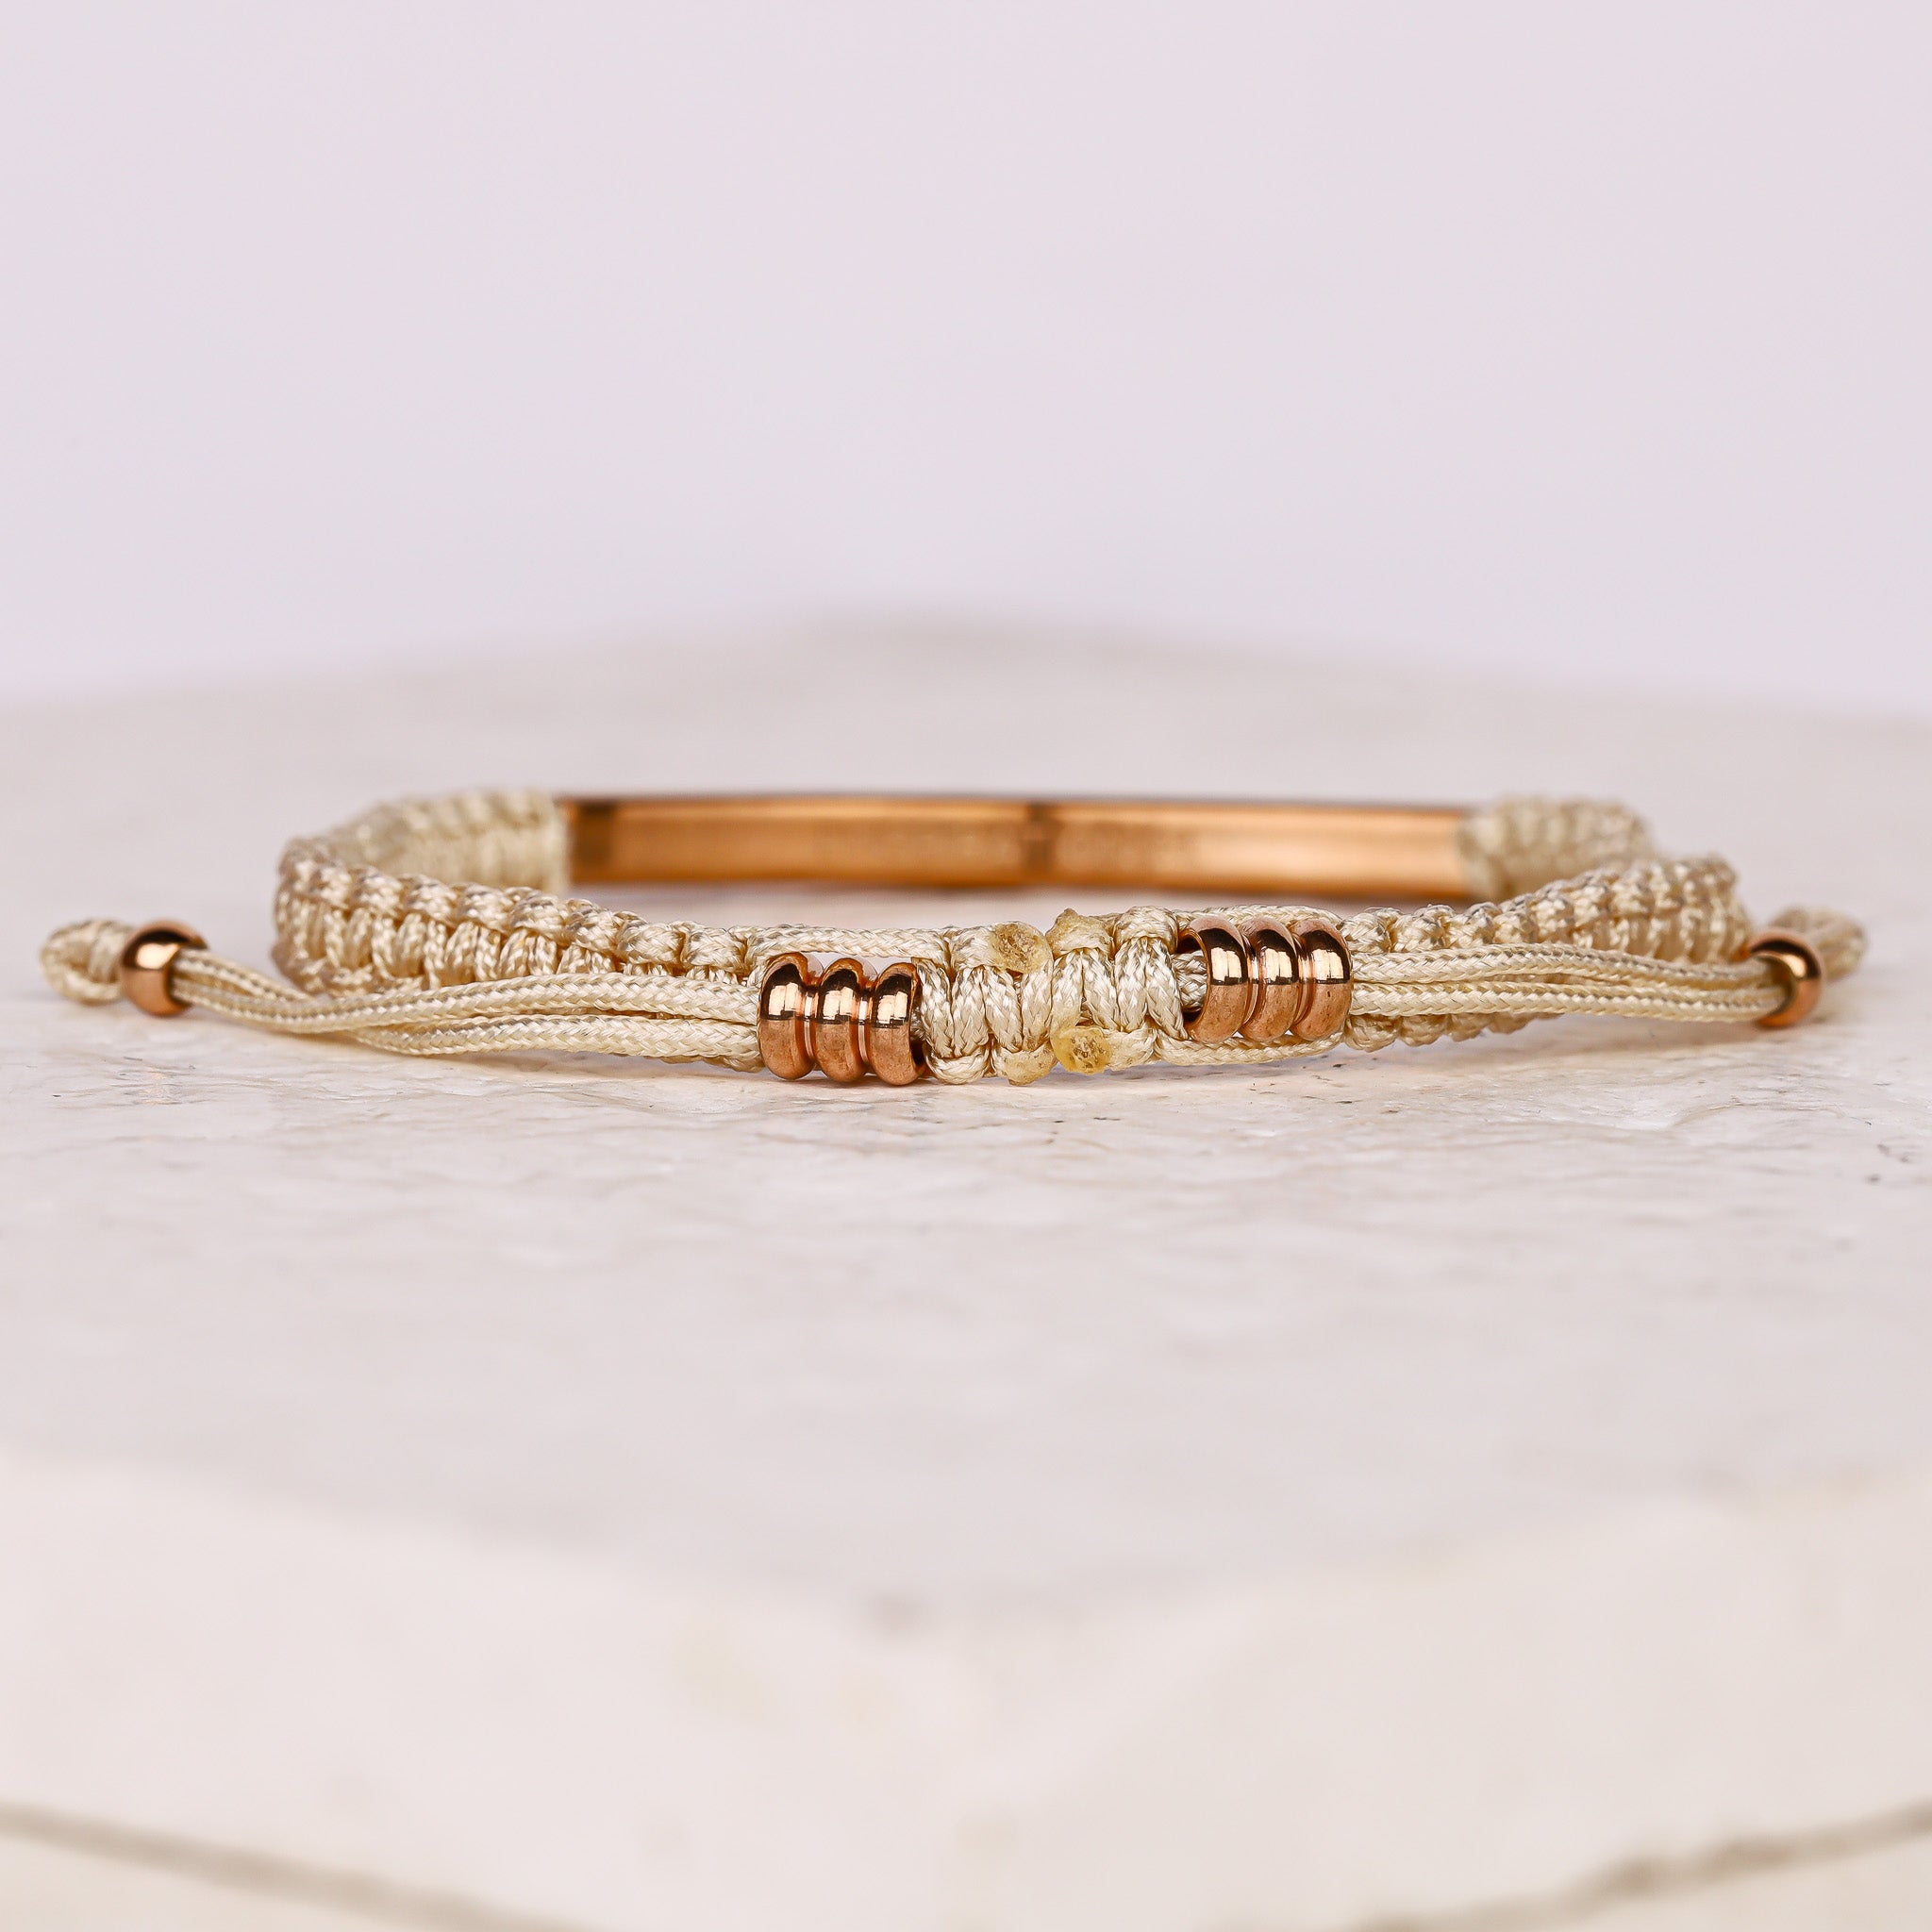 SHE BELIEVED SHE COULD SO SHE DID ROPE BRACELET - Inspiration Co.